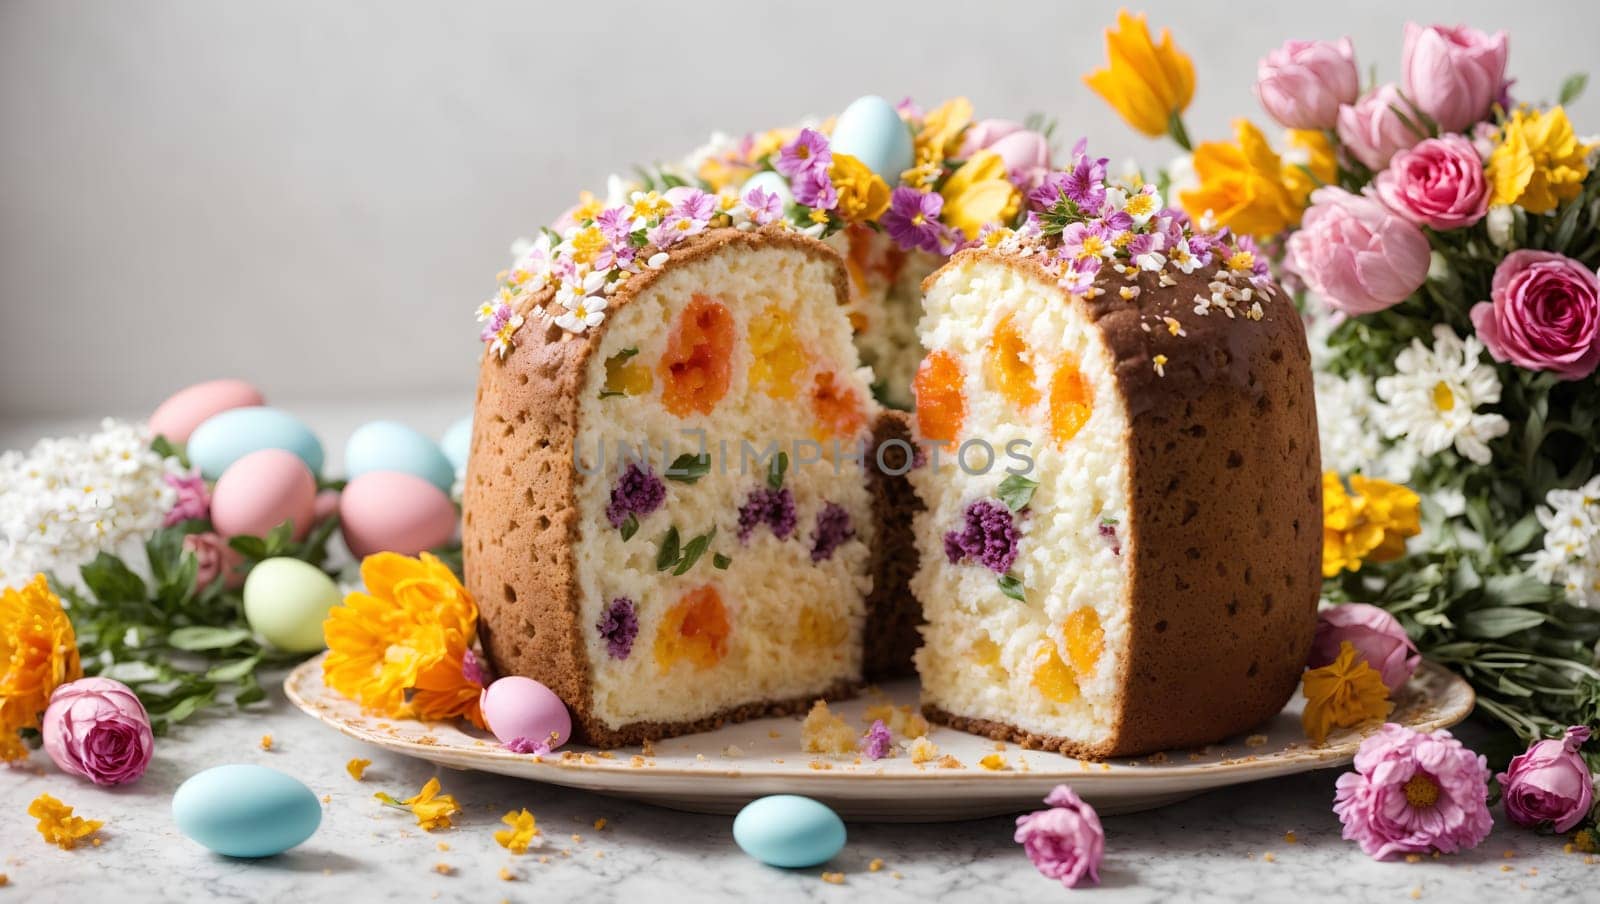 Multicolored Easter cake with Easter eggs by Севостьянов